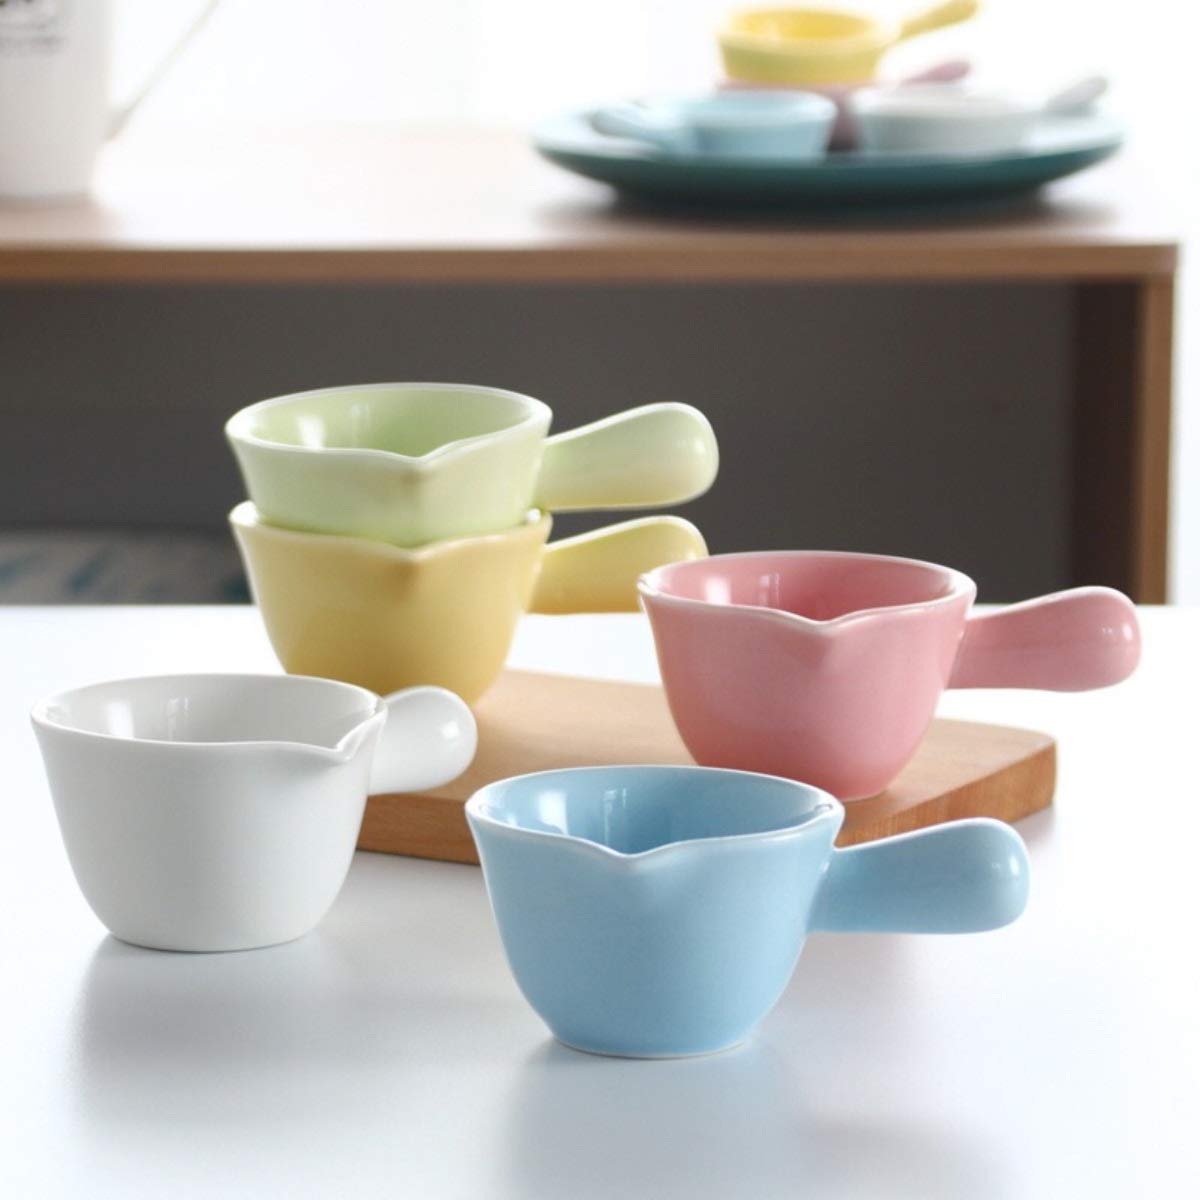 Keponbee Small Sauce Bowls 2 OZ Cute Dip Bowls Set of 5 with Handle Colorful Ceramic Creamer Cup Mini - Mixed 5 Color